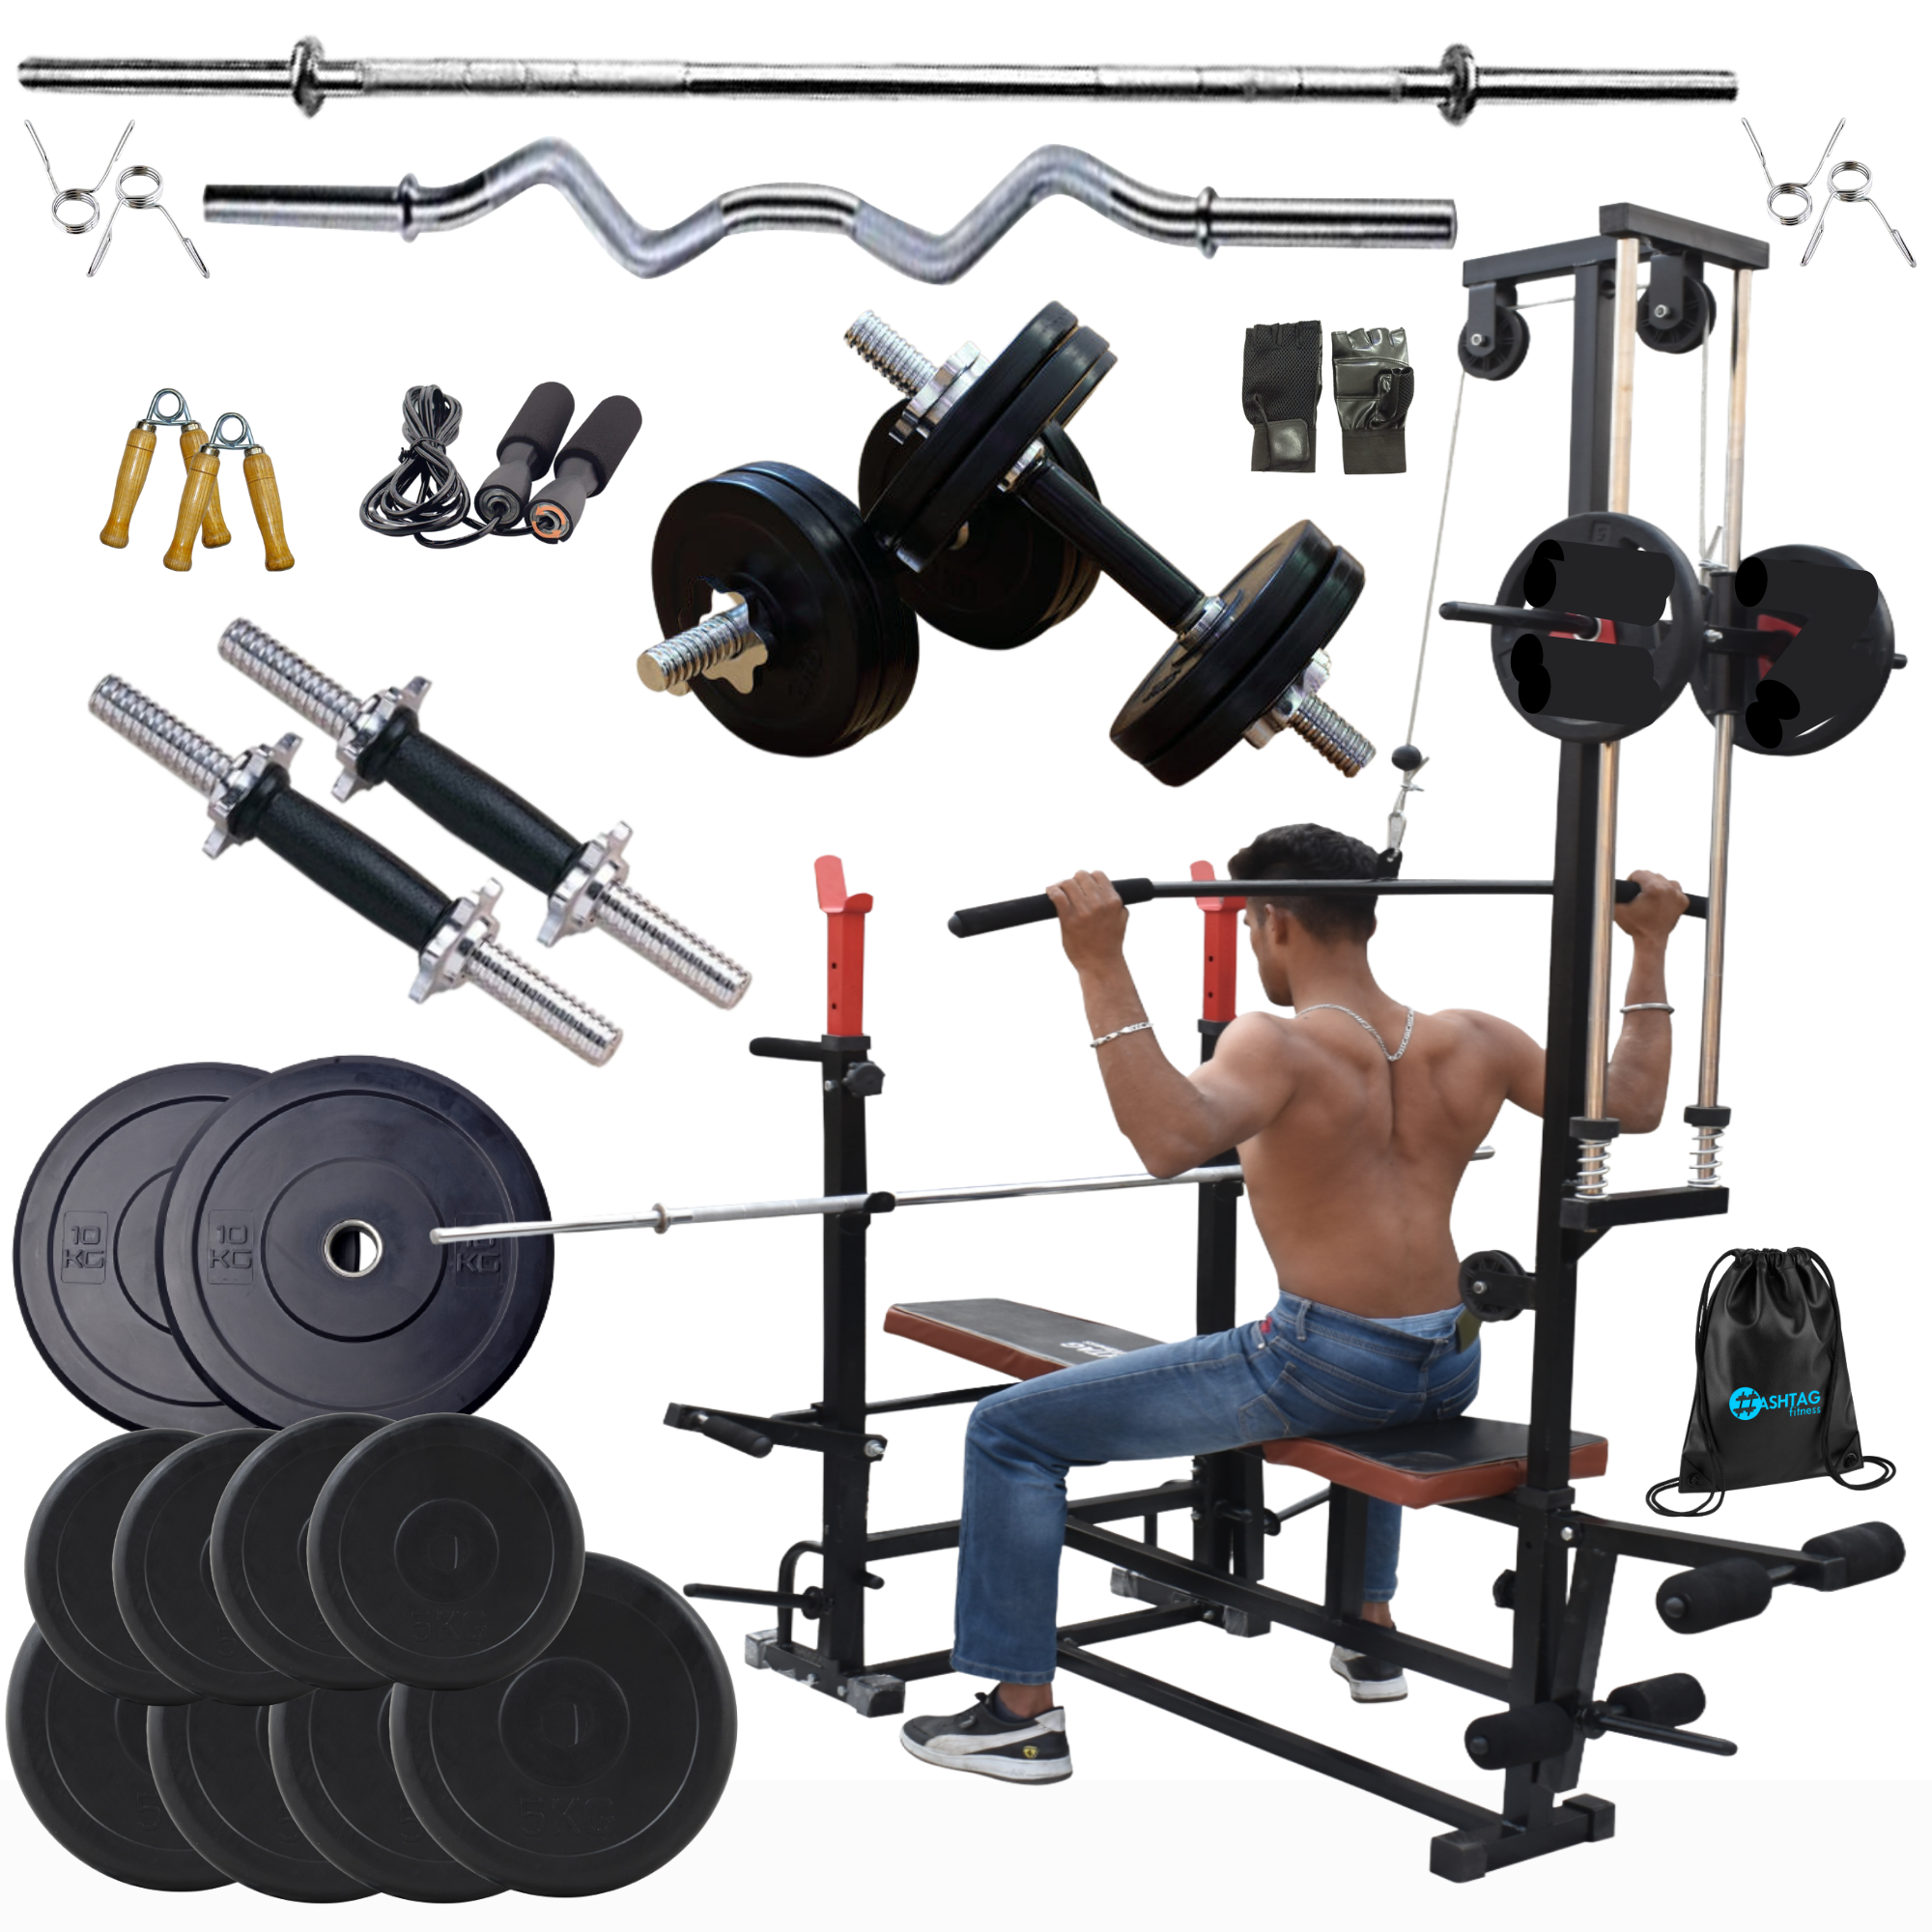 Hashtag Fitness 20 in1 gym bench(Flat & Incline) with lat pull